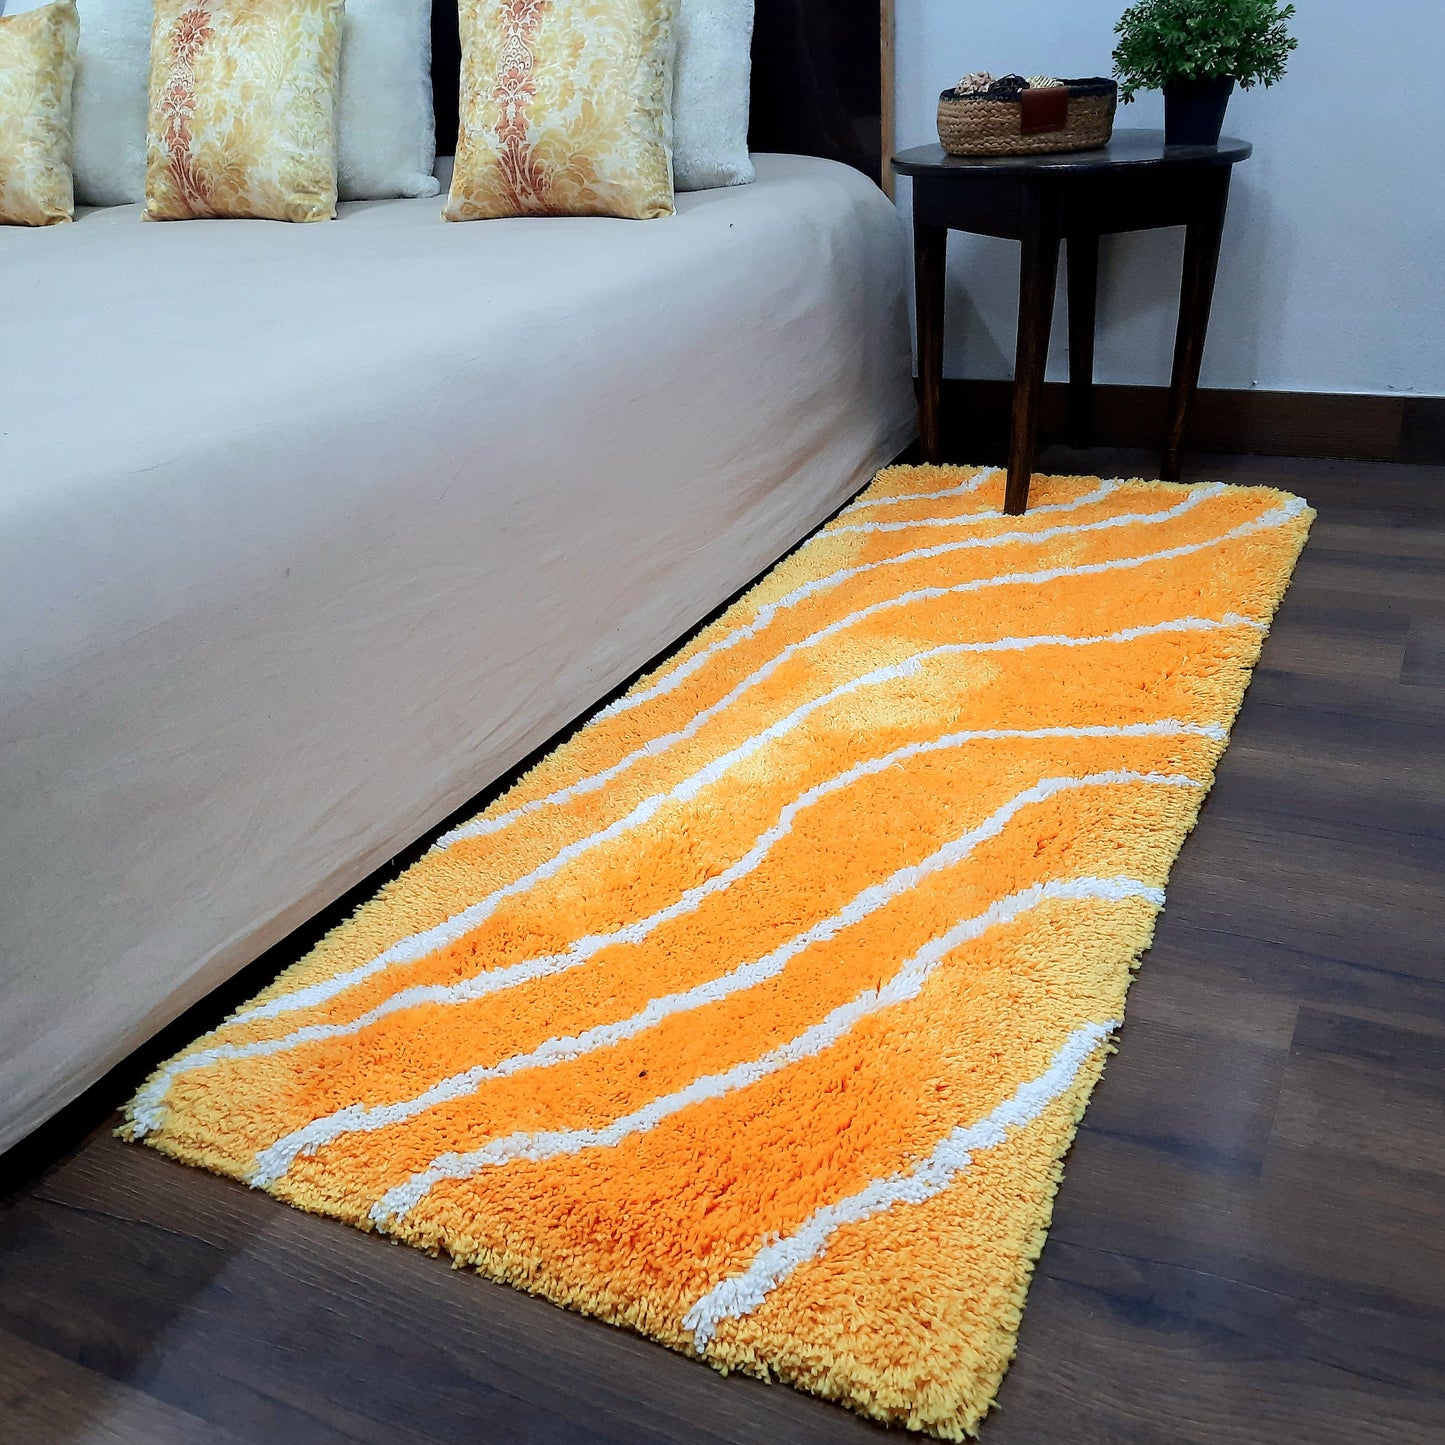 Premium Plush Shaggy Yellow Carpet With White Wave Design /Bedside Runners by Avioni Home